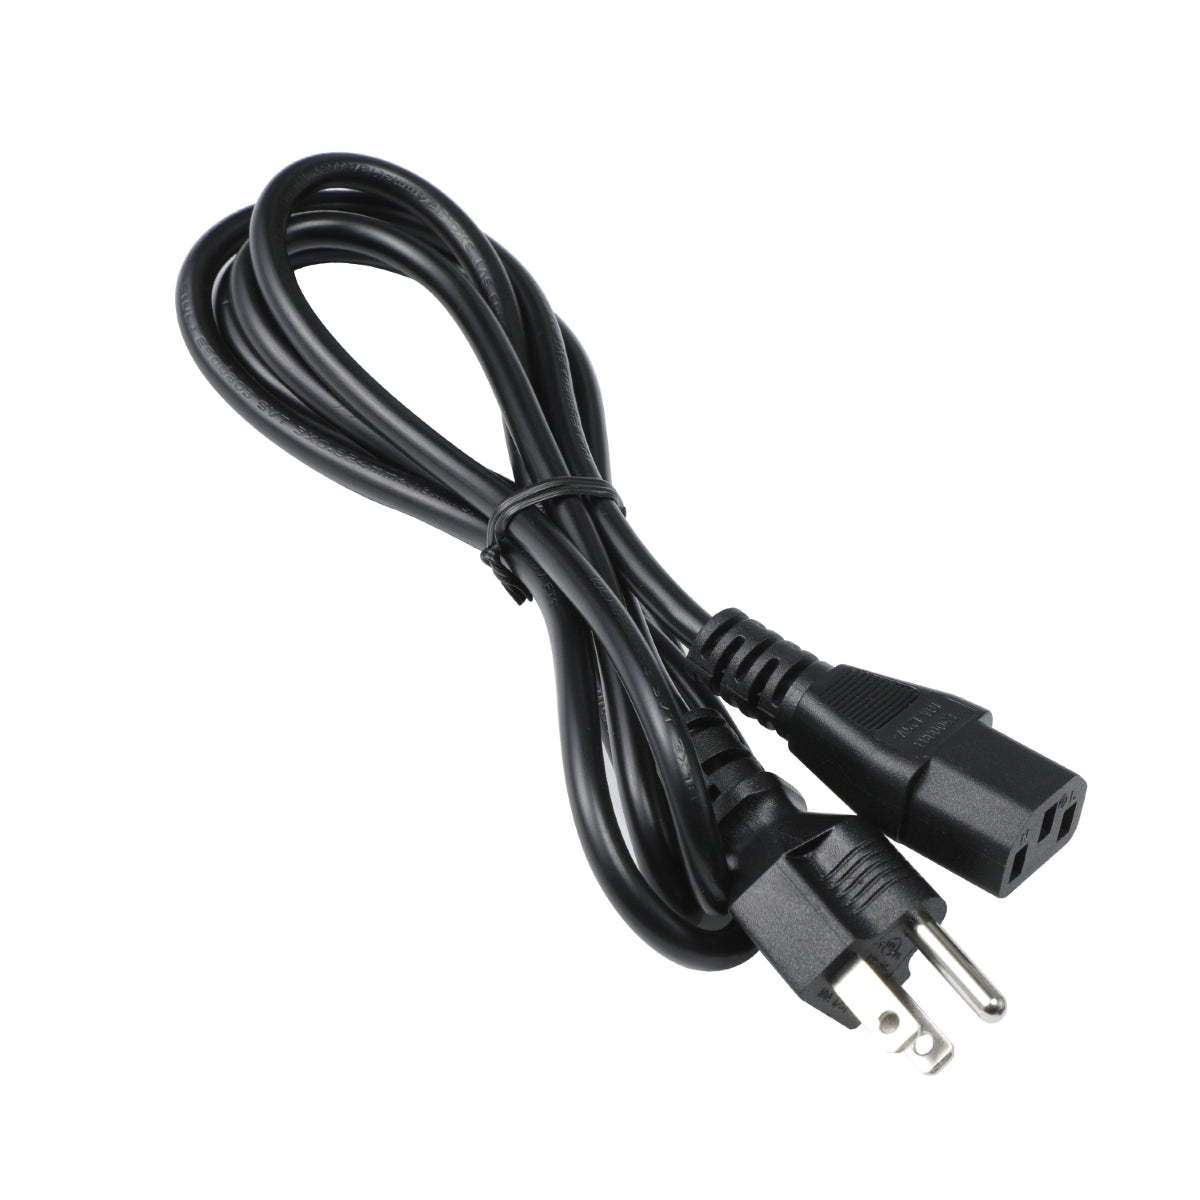 Power Cord for Samsung S32D850T TV.